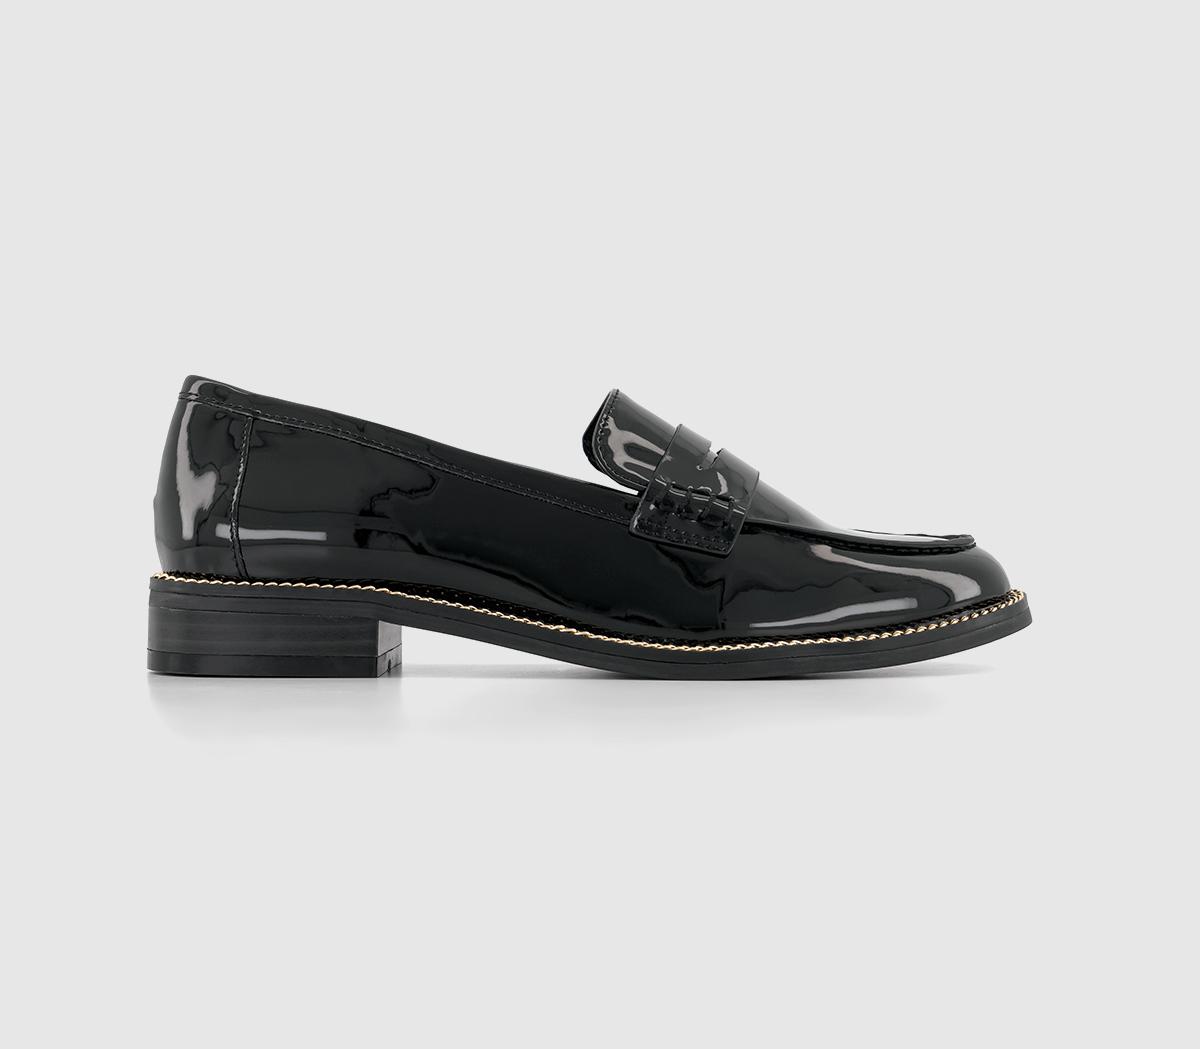 OFFICEFire Ball Chain Welt LoafersBlack Patent